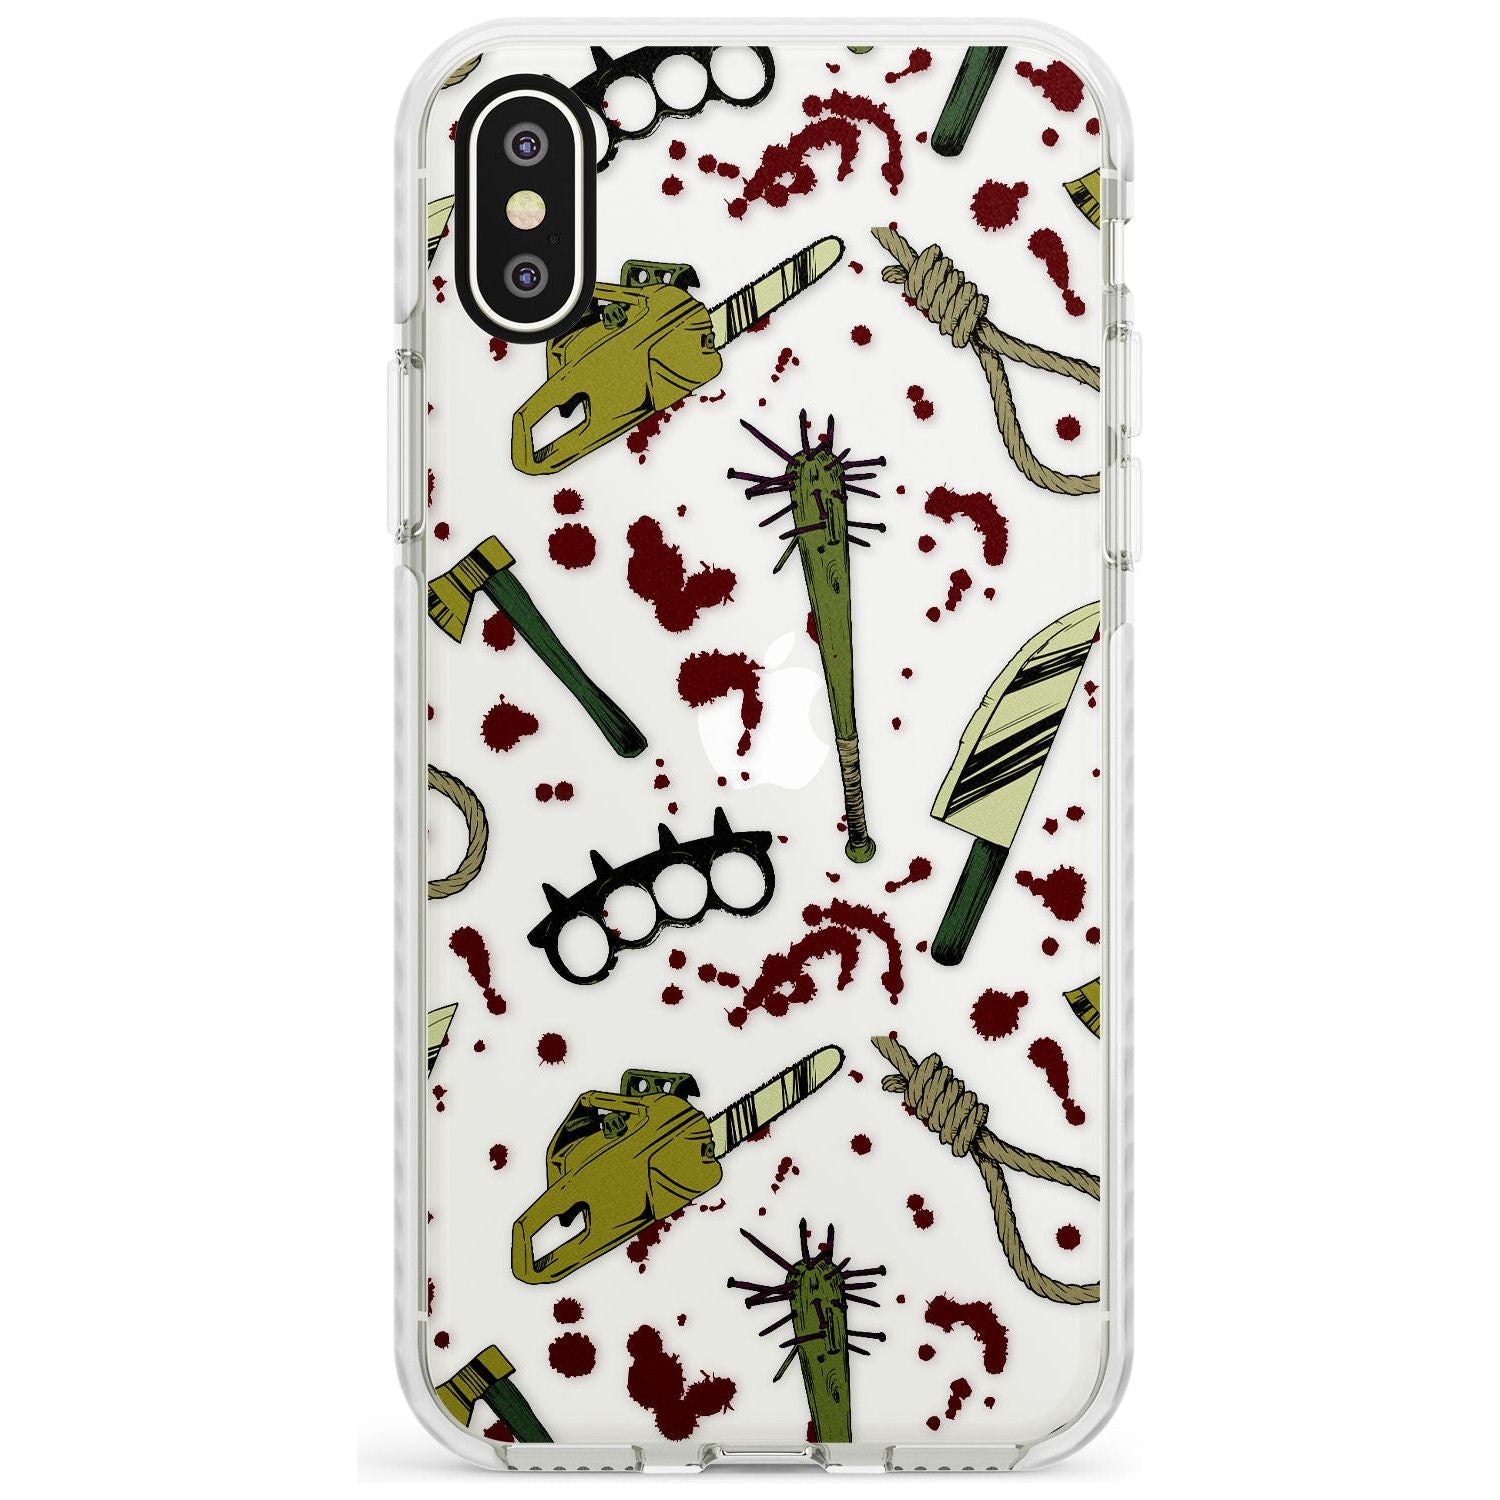 Movie Massacre Impact Phone Case for iPhone X XS Max XR